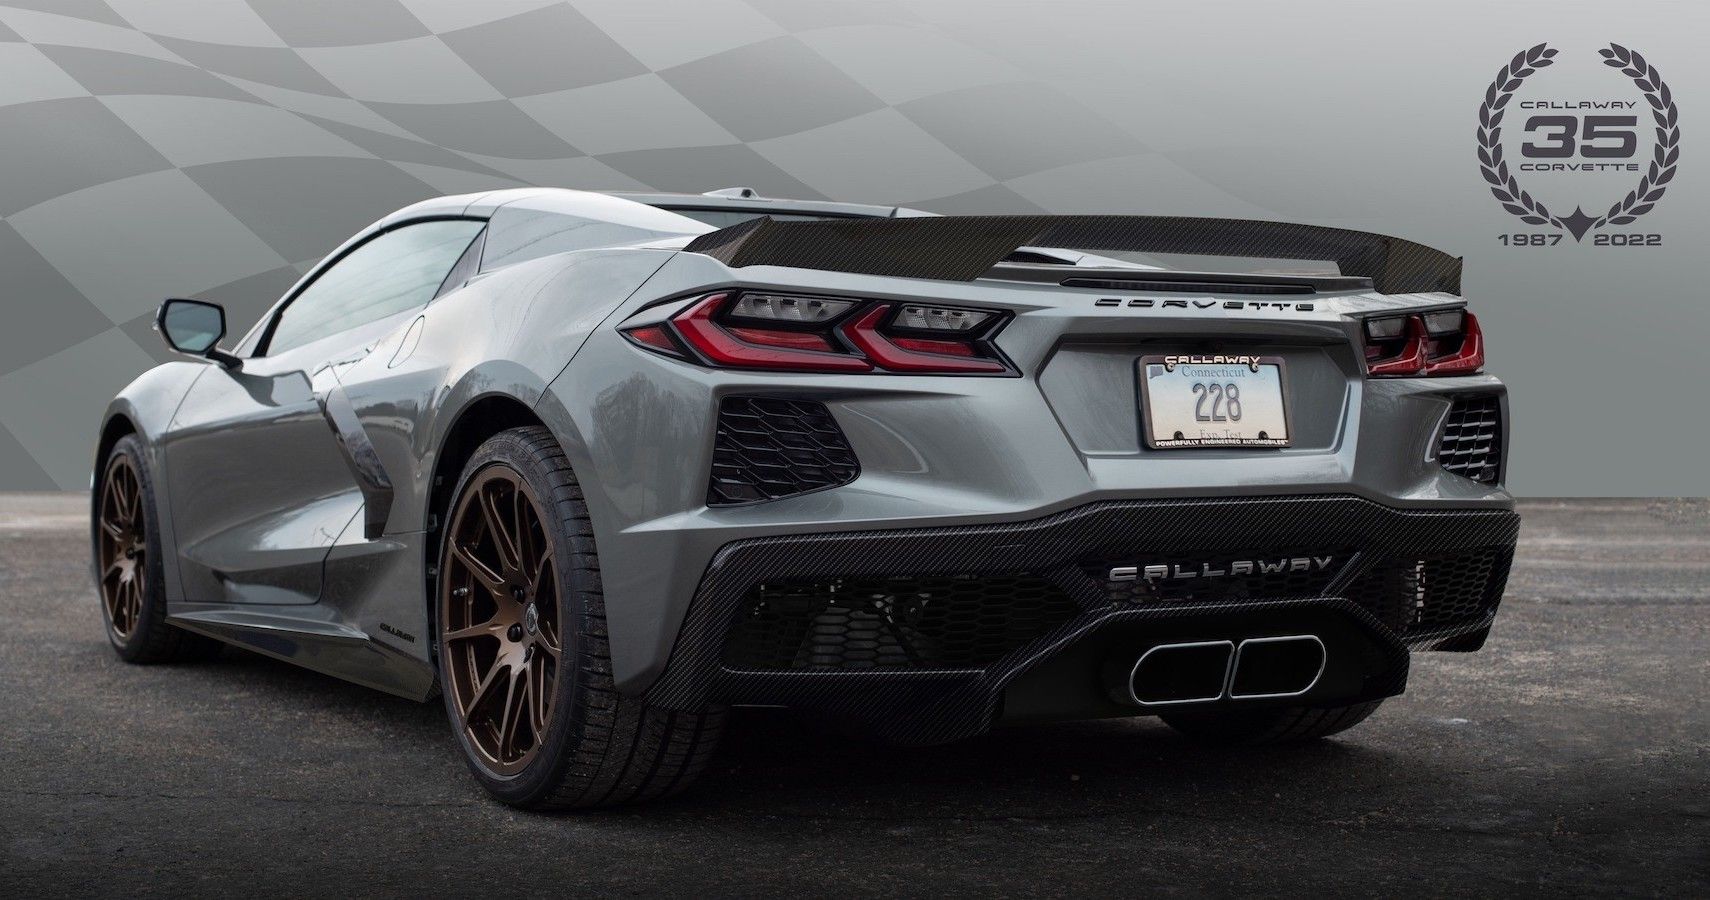 Heres What We Know About Callaways Upcoming Supercharged Corvette C8